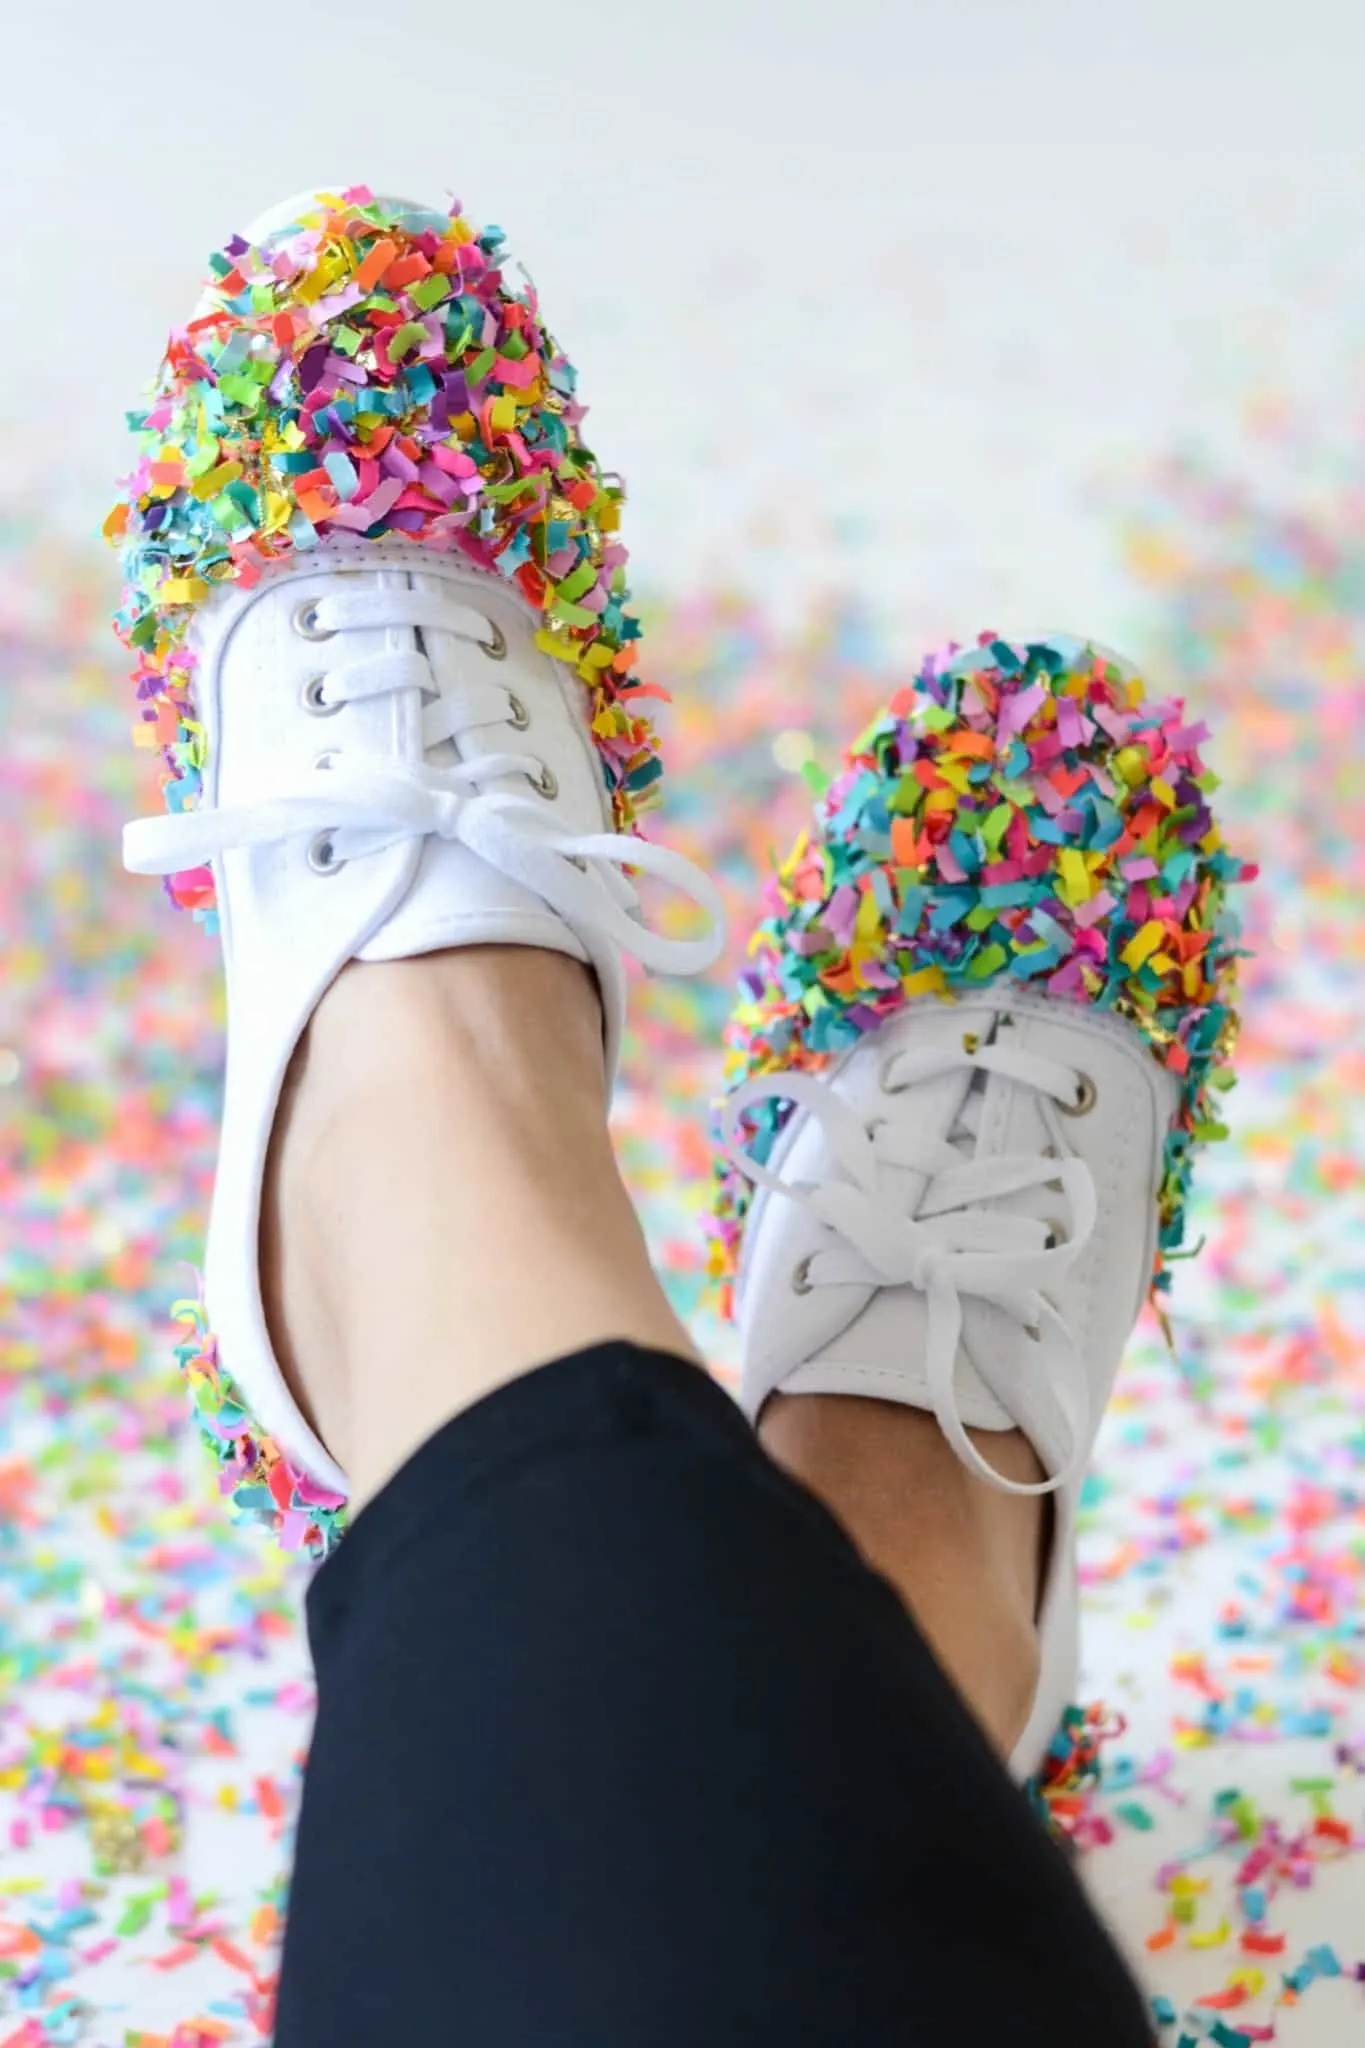 White shoes with colorful confetti covering the toes